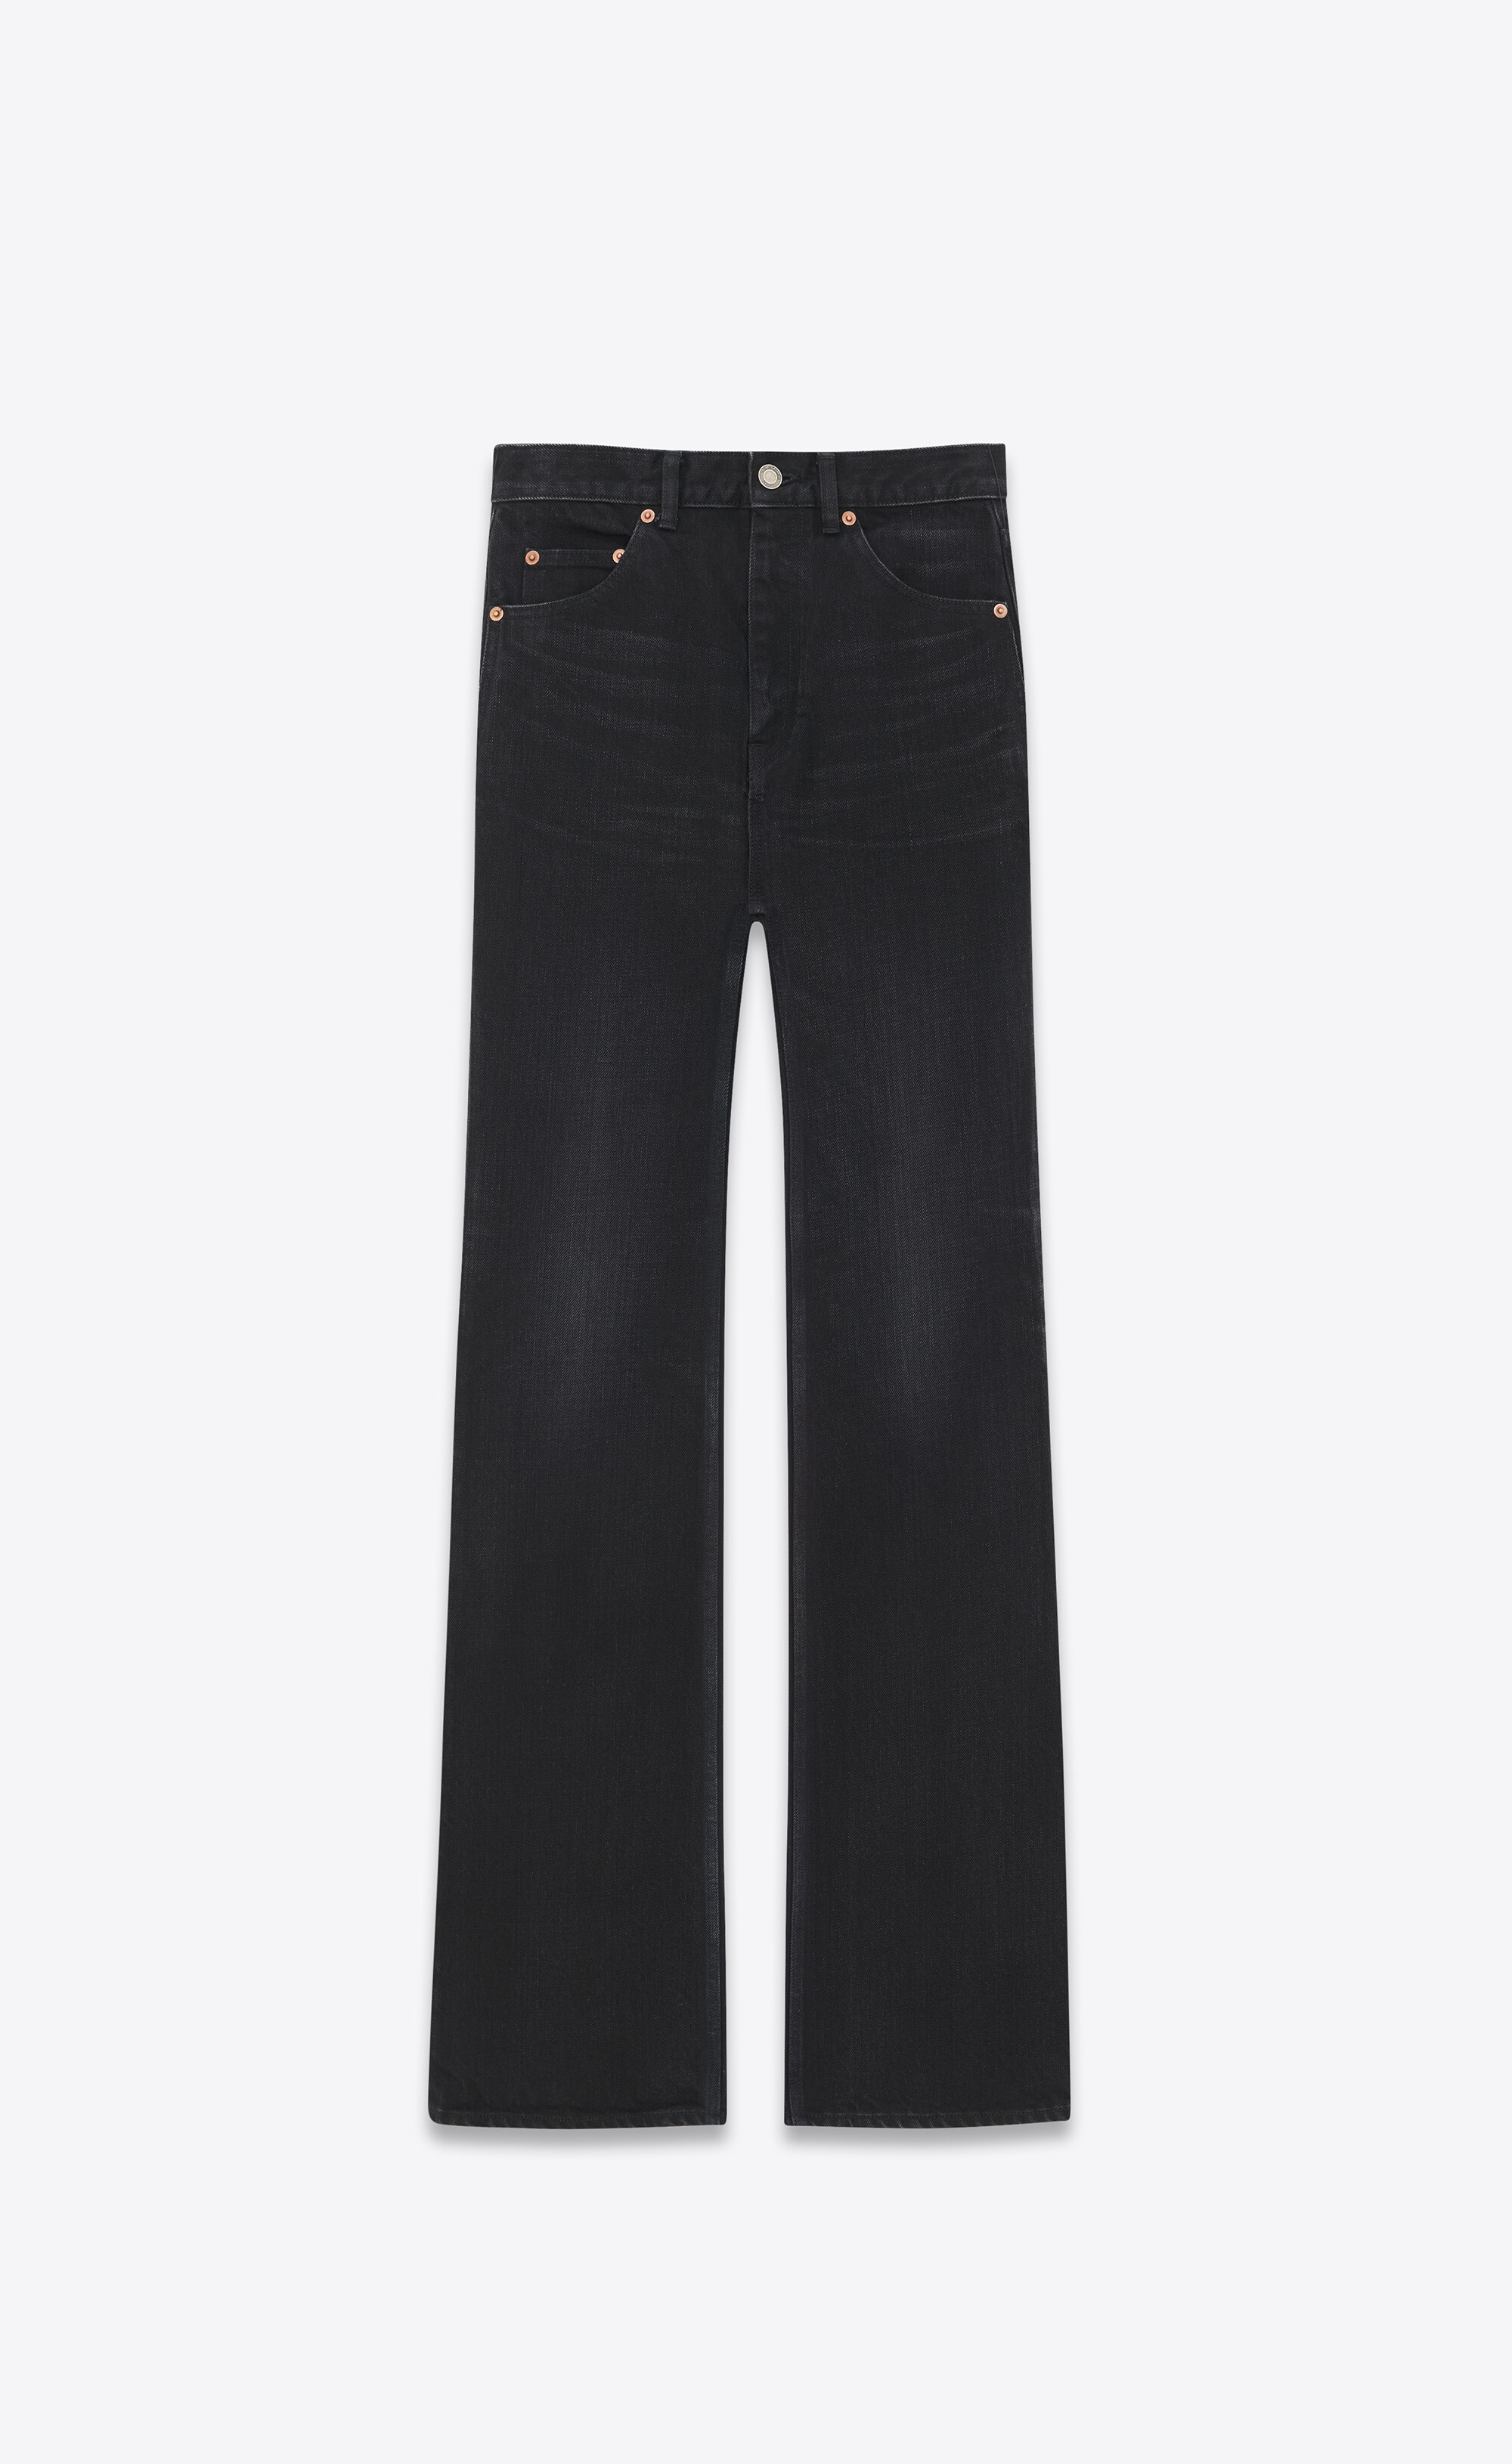 Flared pants: This trend is set to unseat jeans this fall